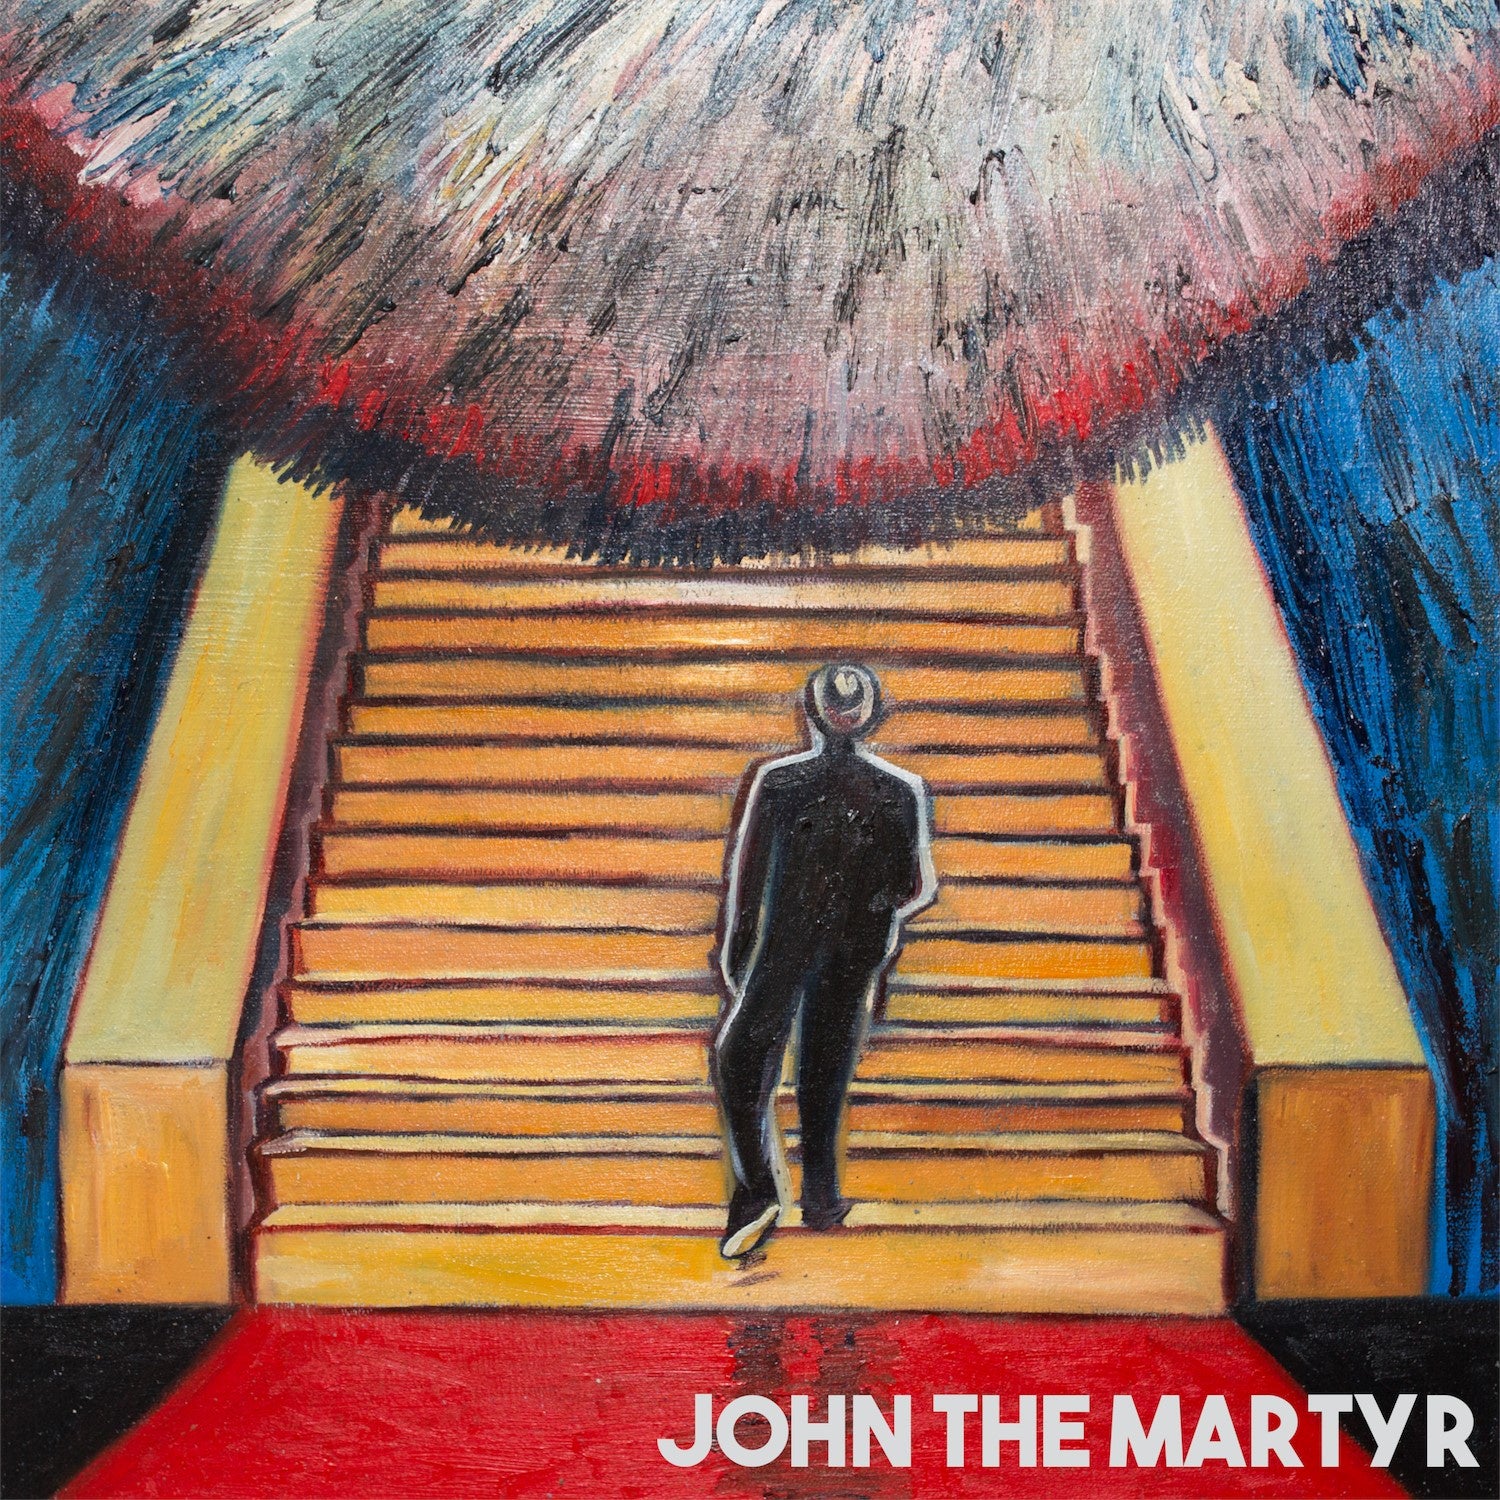 John The Martyr - History - New Lp 2019 Schoolkids RSD Limited Release - Soul